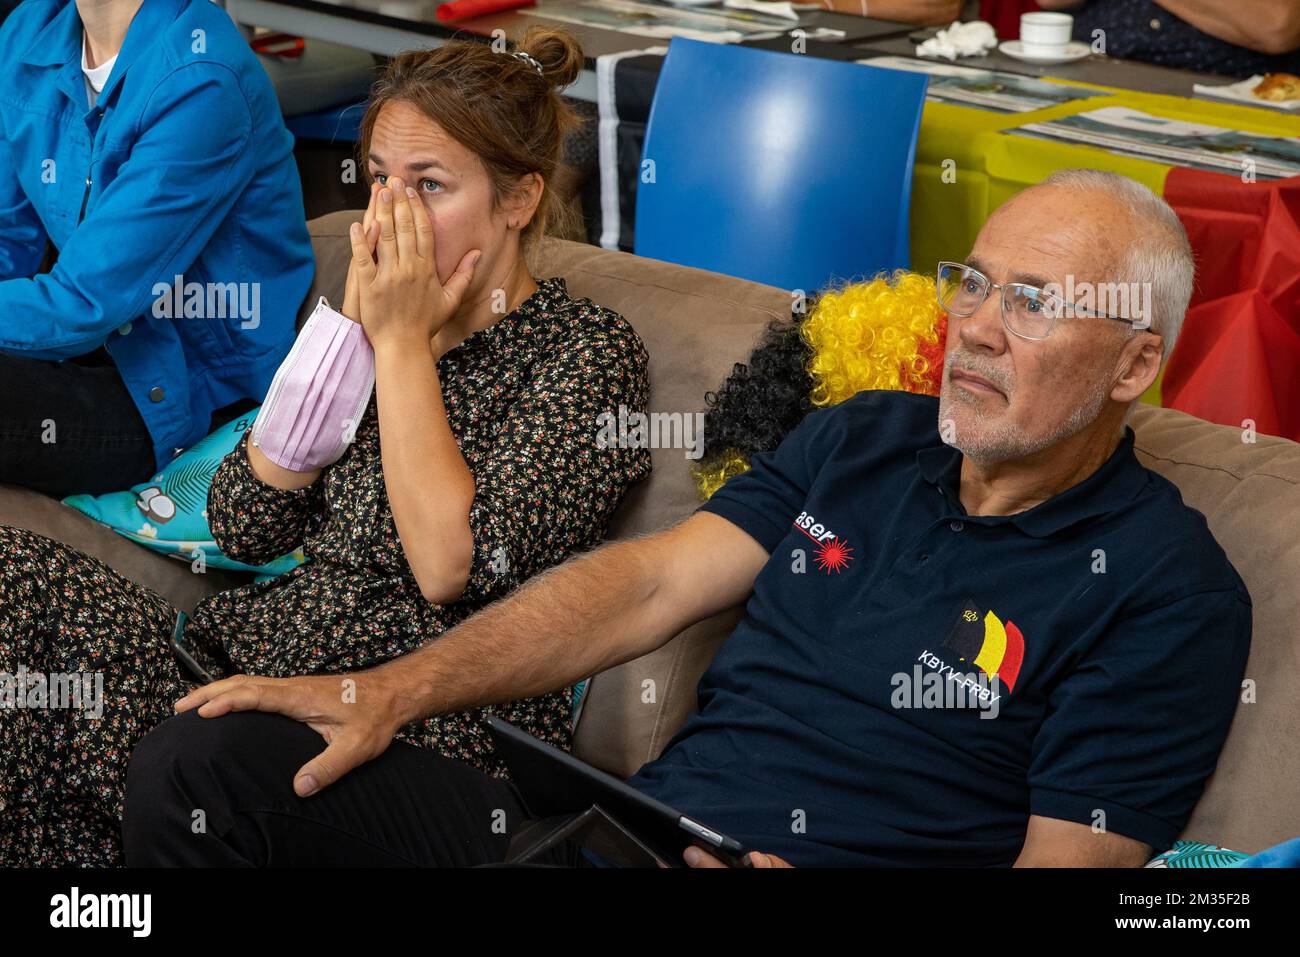 Belgian Sailor Emma Plasschaert's sister Katrien Plasschaert and father Bart Plasschaert pictured during a screening of the medal race of the women's one-person dinghy laser radial sailing event, with Belgian Plasschaert starting in fifth position, on the tenth day of the 'Tokyo 2020 Olympic Games' at the Club Inside-Outside sailing club in Oostende, on Sunday 01 August 2021. The postponed 2020 Summer Olympics are taking place from 23 July to 8 August 2021. BELGA PHOTO KURT DESPLENTER Stock Photo